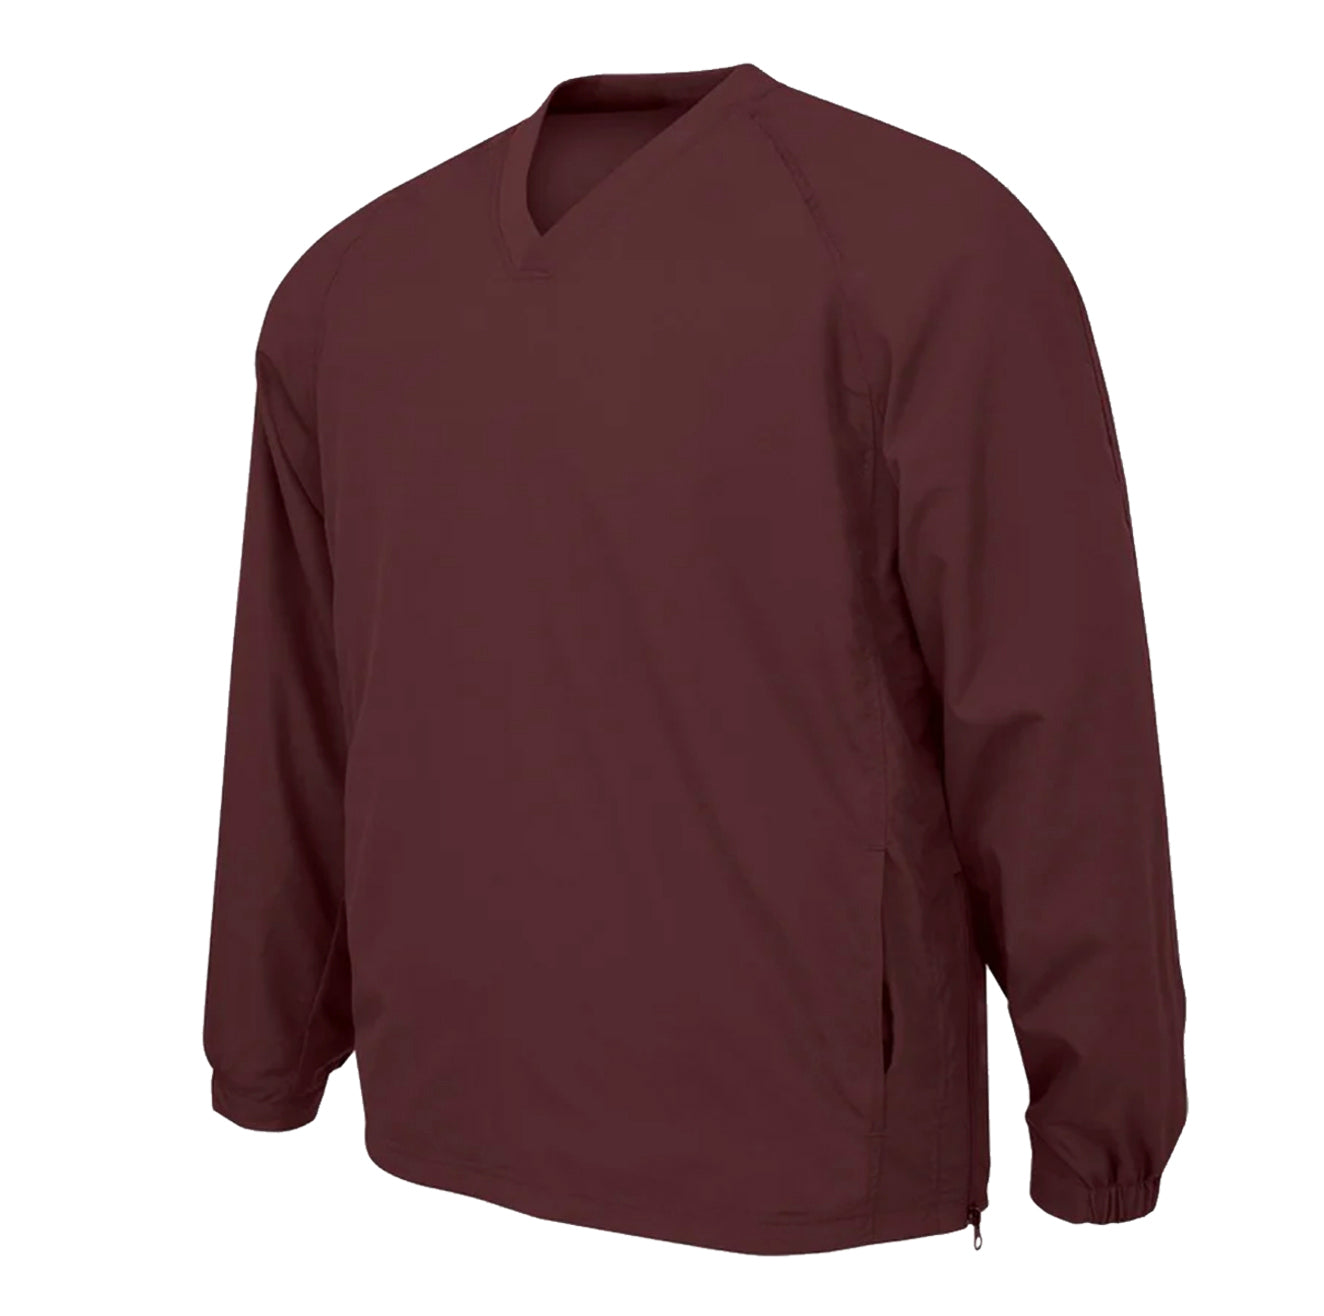 Spectrum Windshirt - Adult - Youth Sports Products